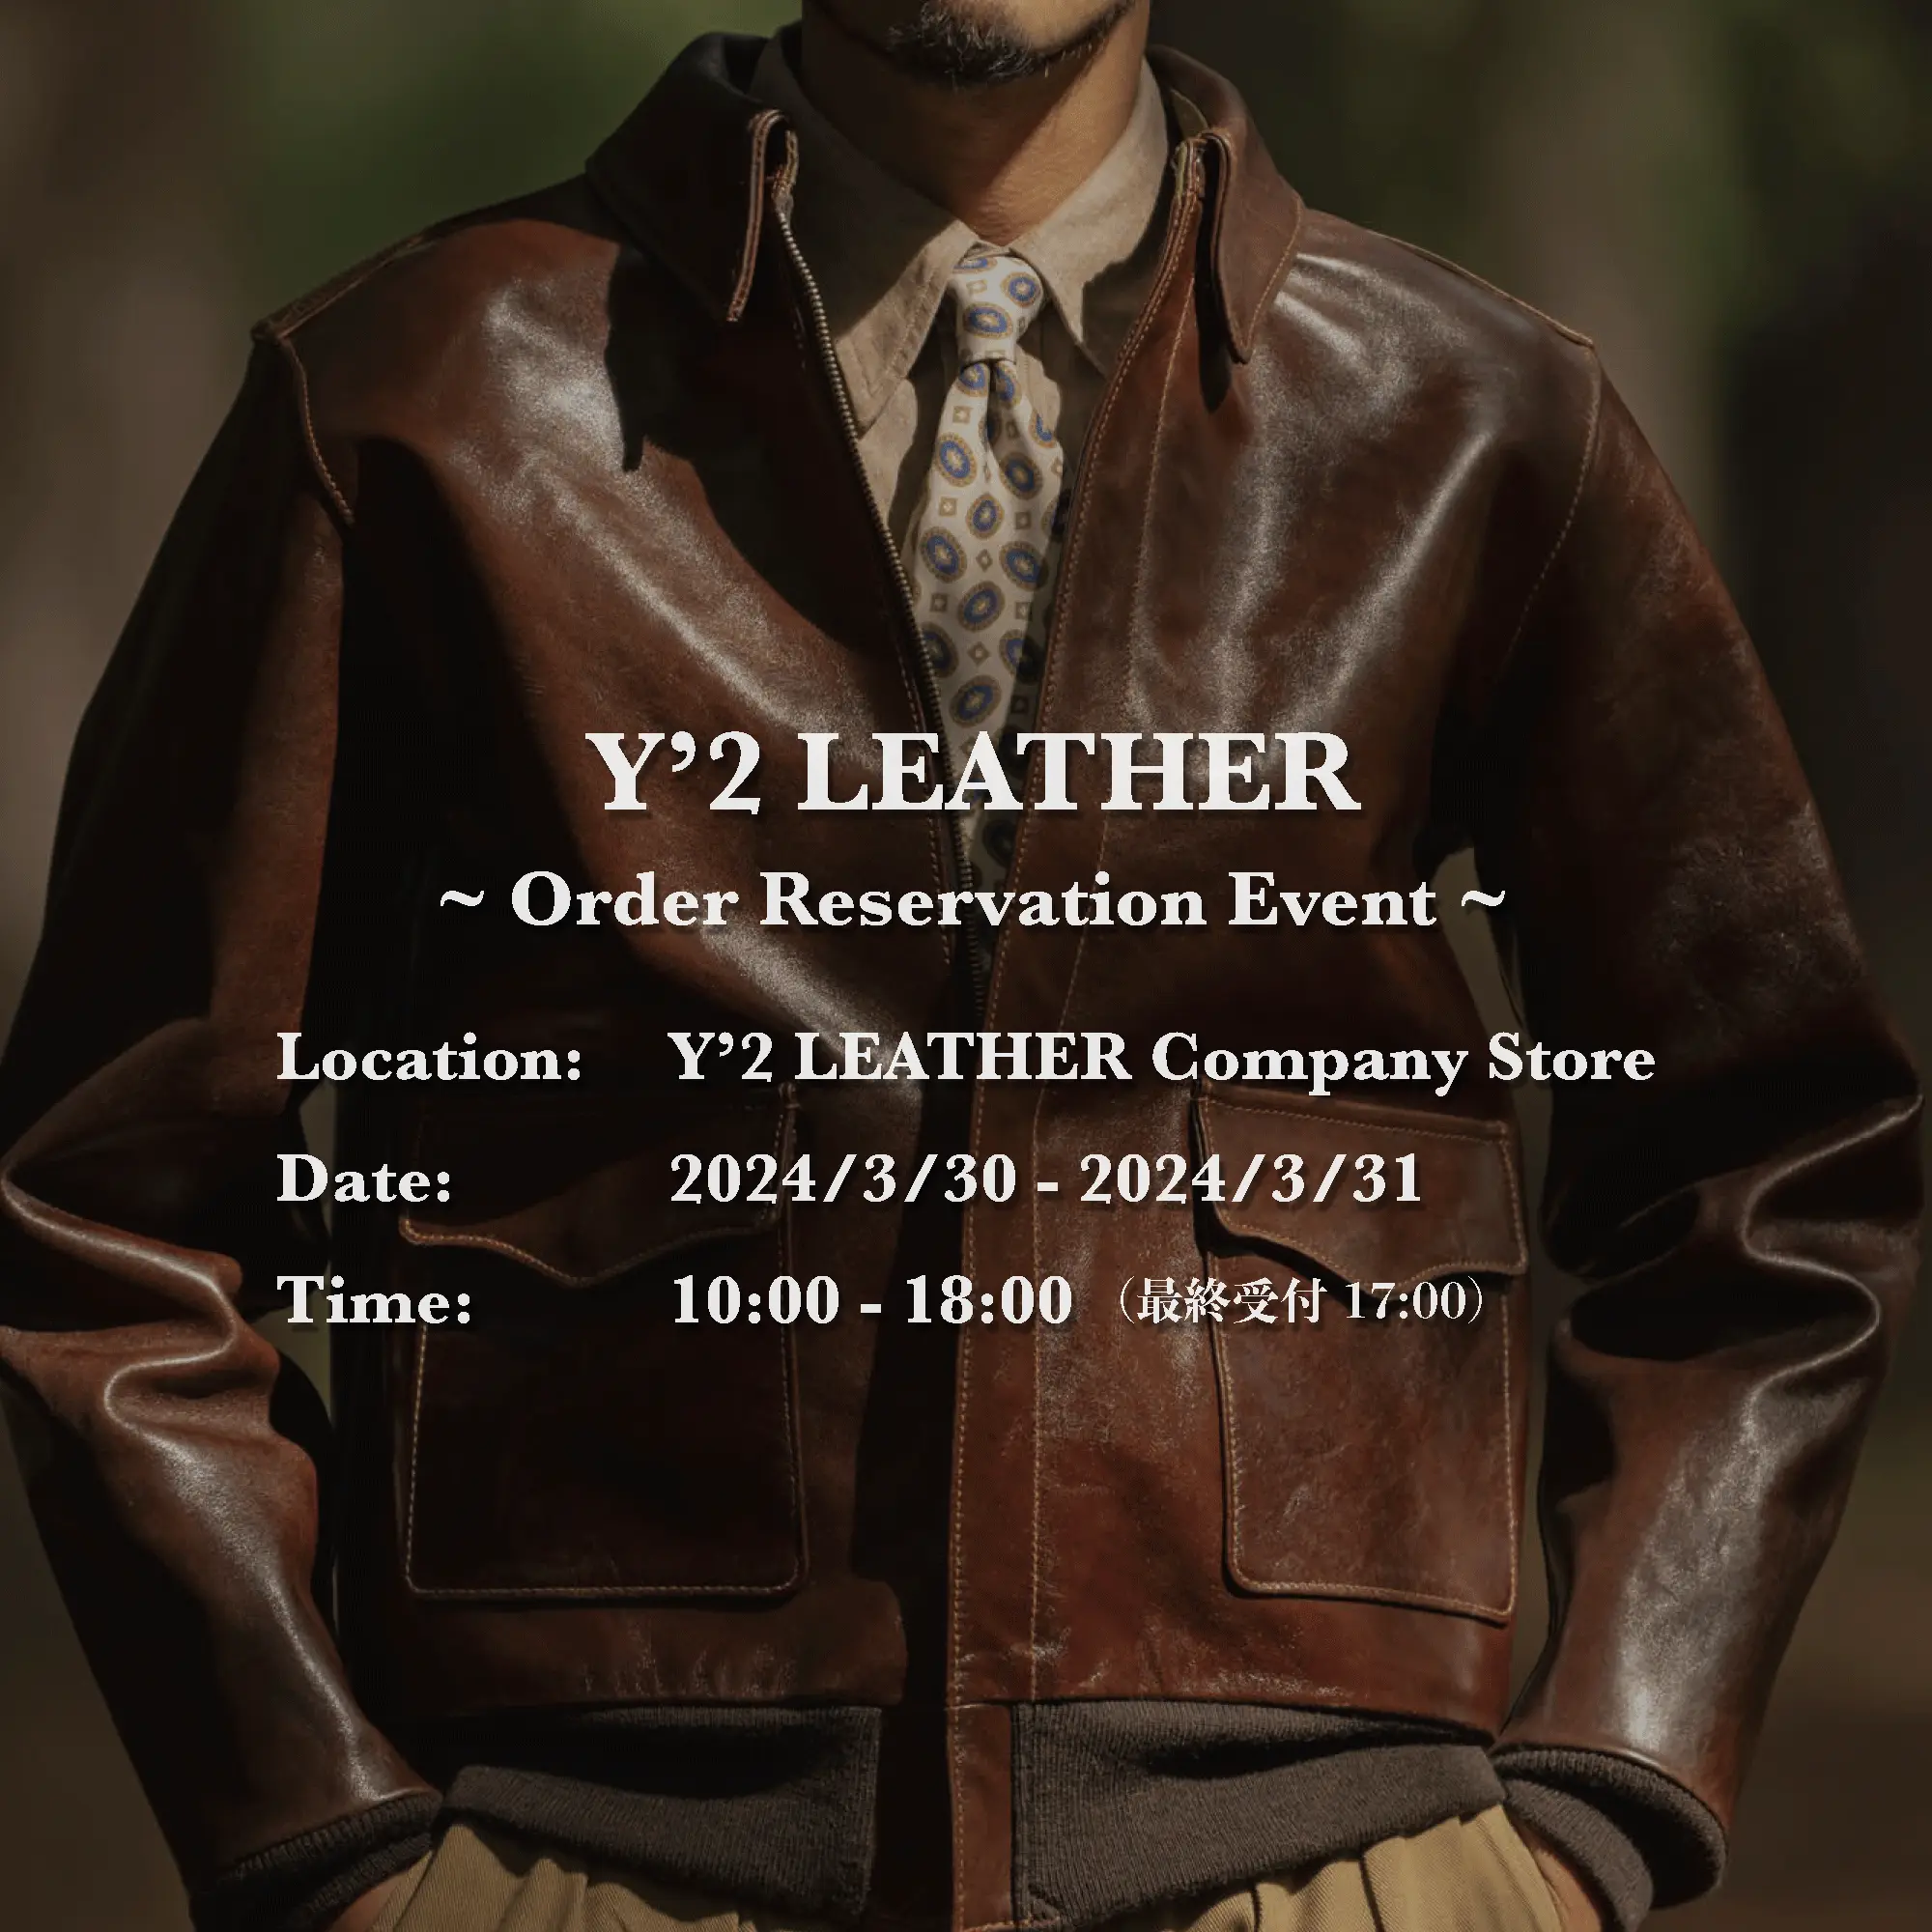 About the Y'2 LEATHER order reservation event leather jacket brand